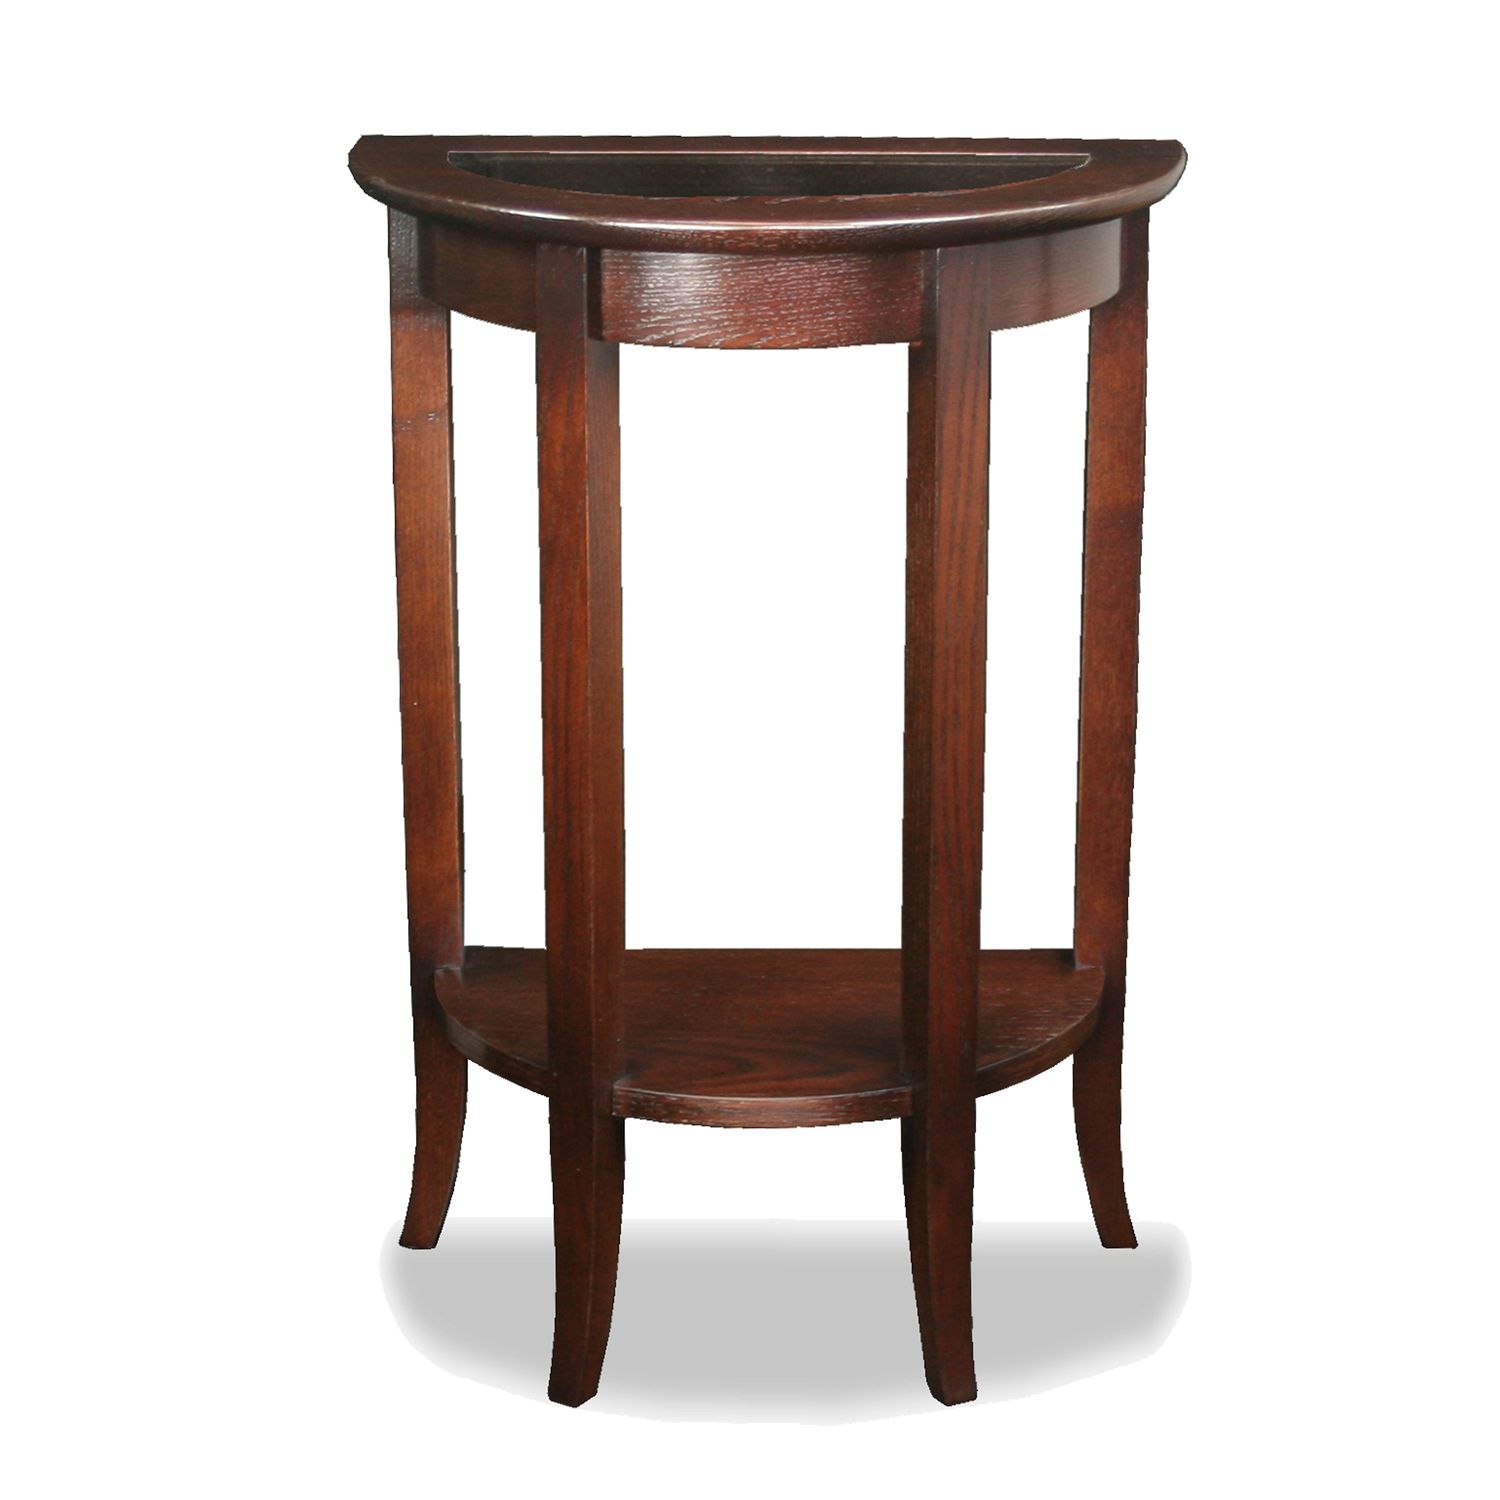 Image for Leick Furniture Chocolate Bronze-Tone Demilune Stand at Kohl's.